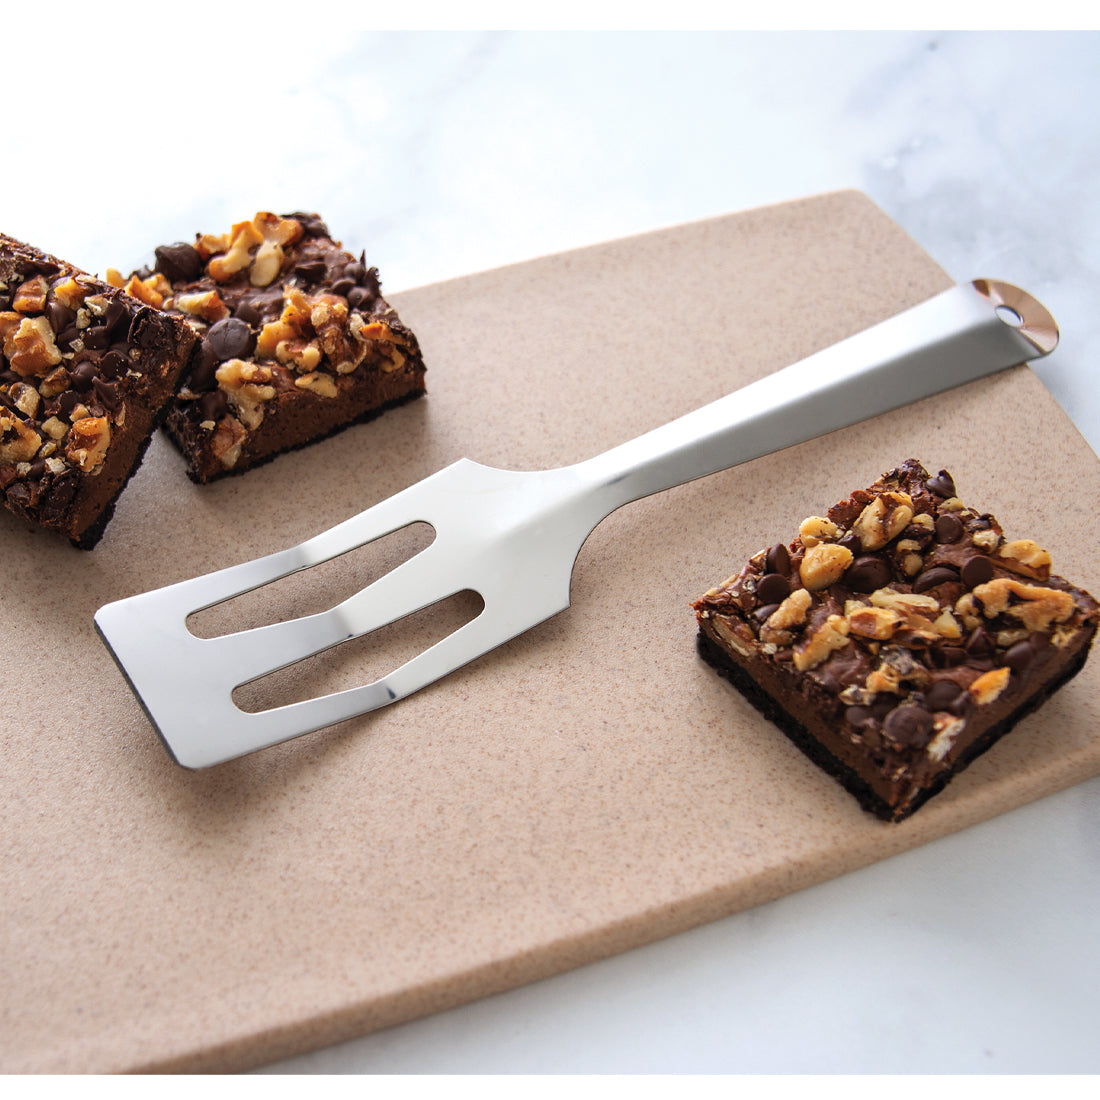 Serverspoon on a marbled countertop surrounded by brownies.